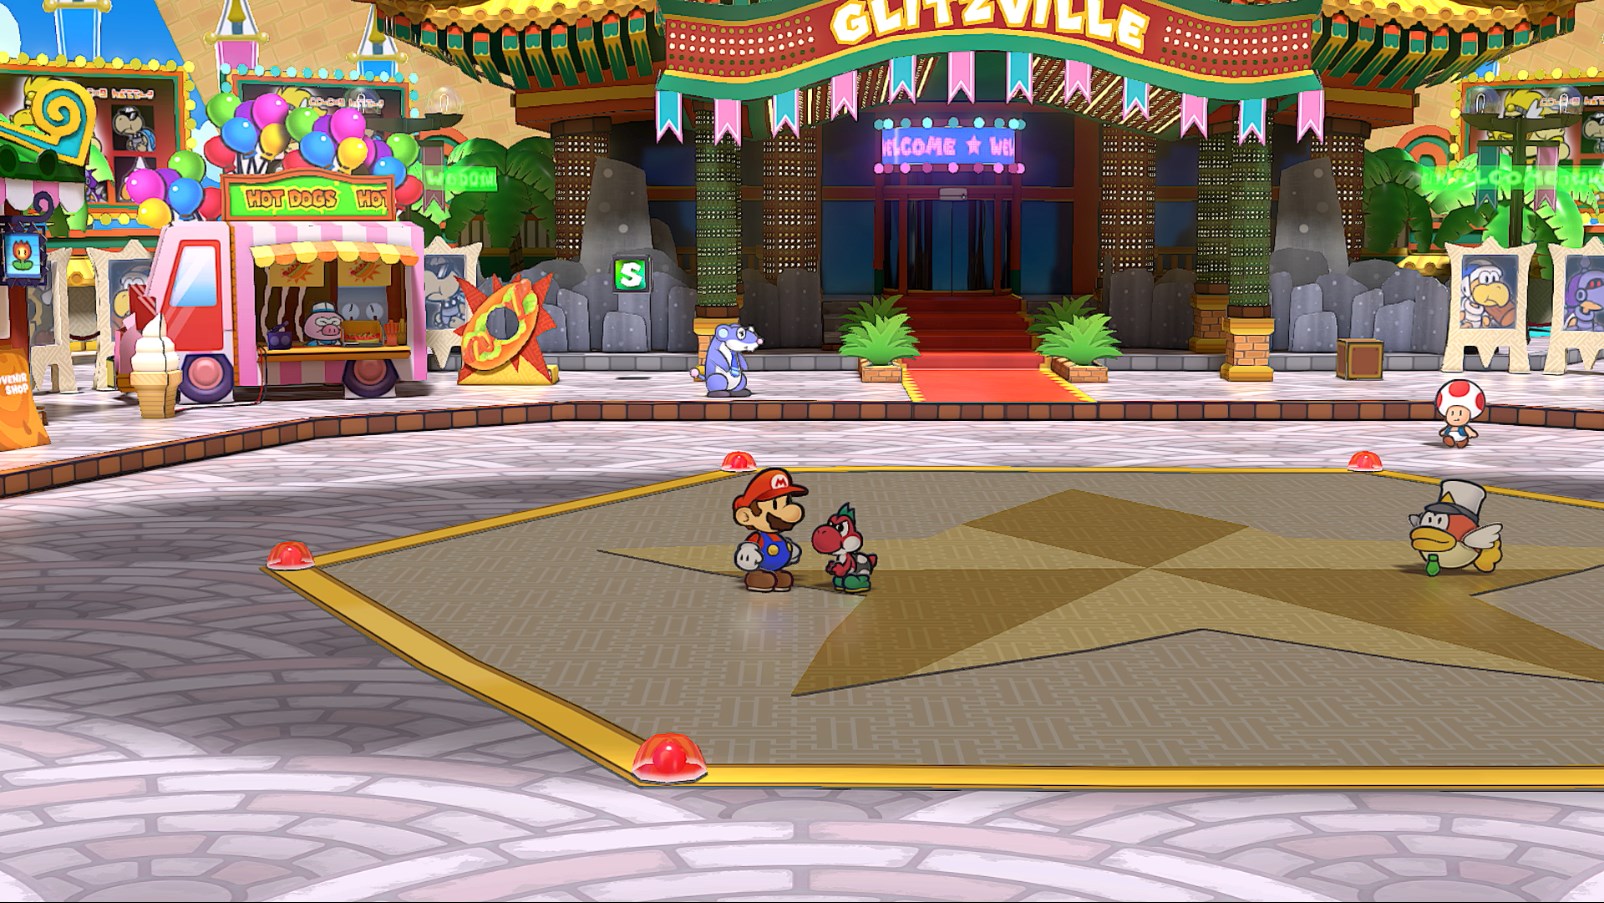 Mario and a red Yoshi Kid in Paper Mario: The Thousand-Year Door